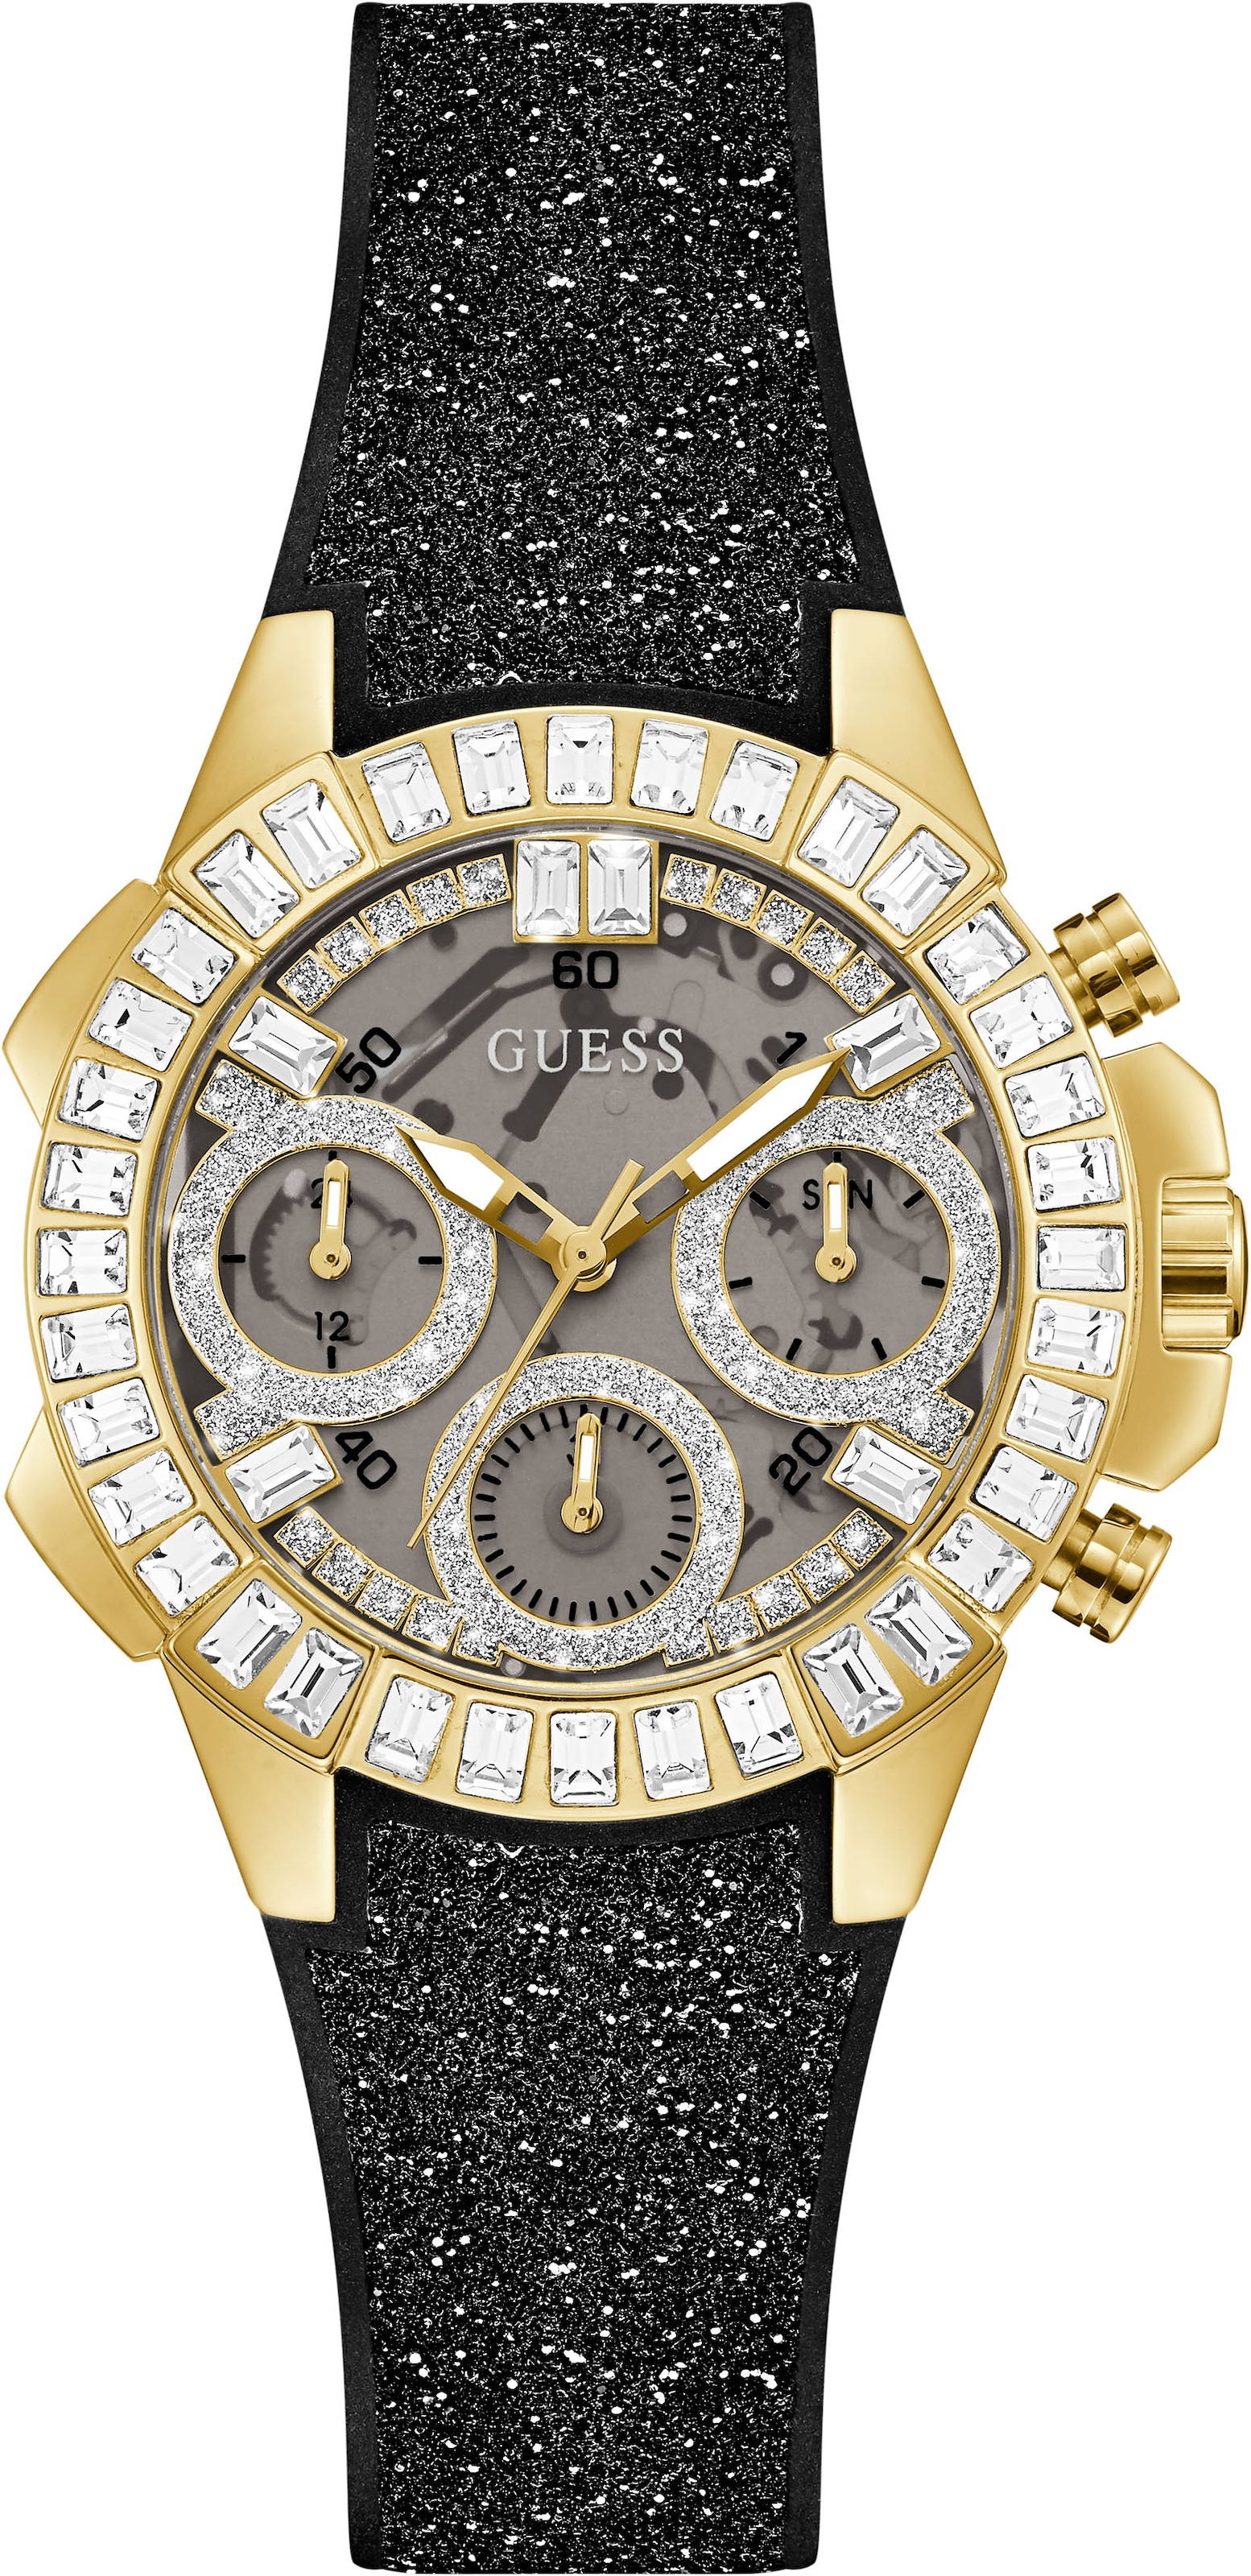 Guess Multifunktionsuhr »GW0313L2,BOMBSHELL« kaufen OTTO bei